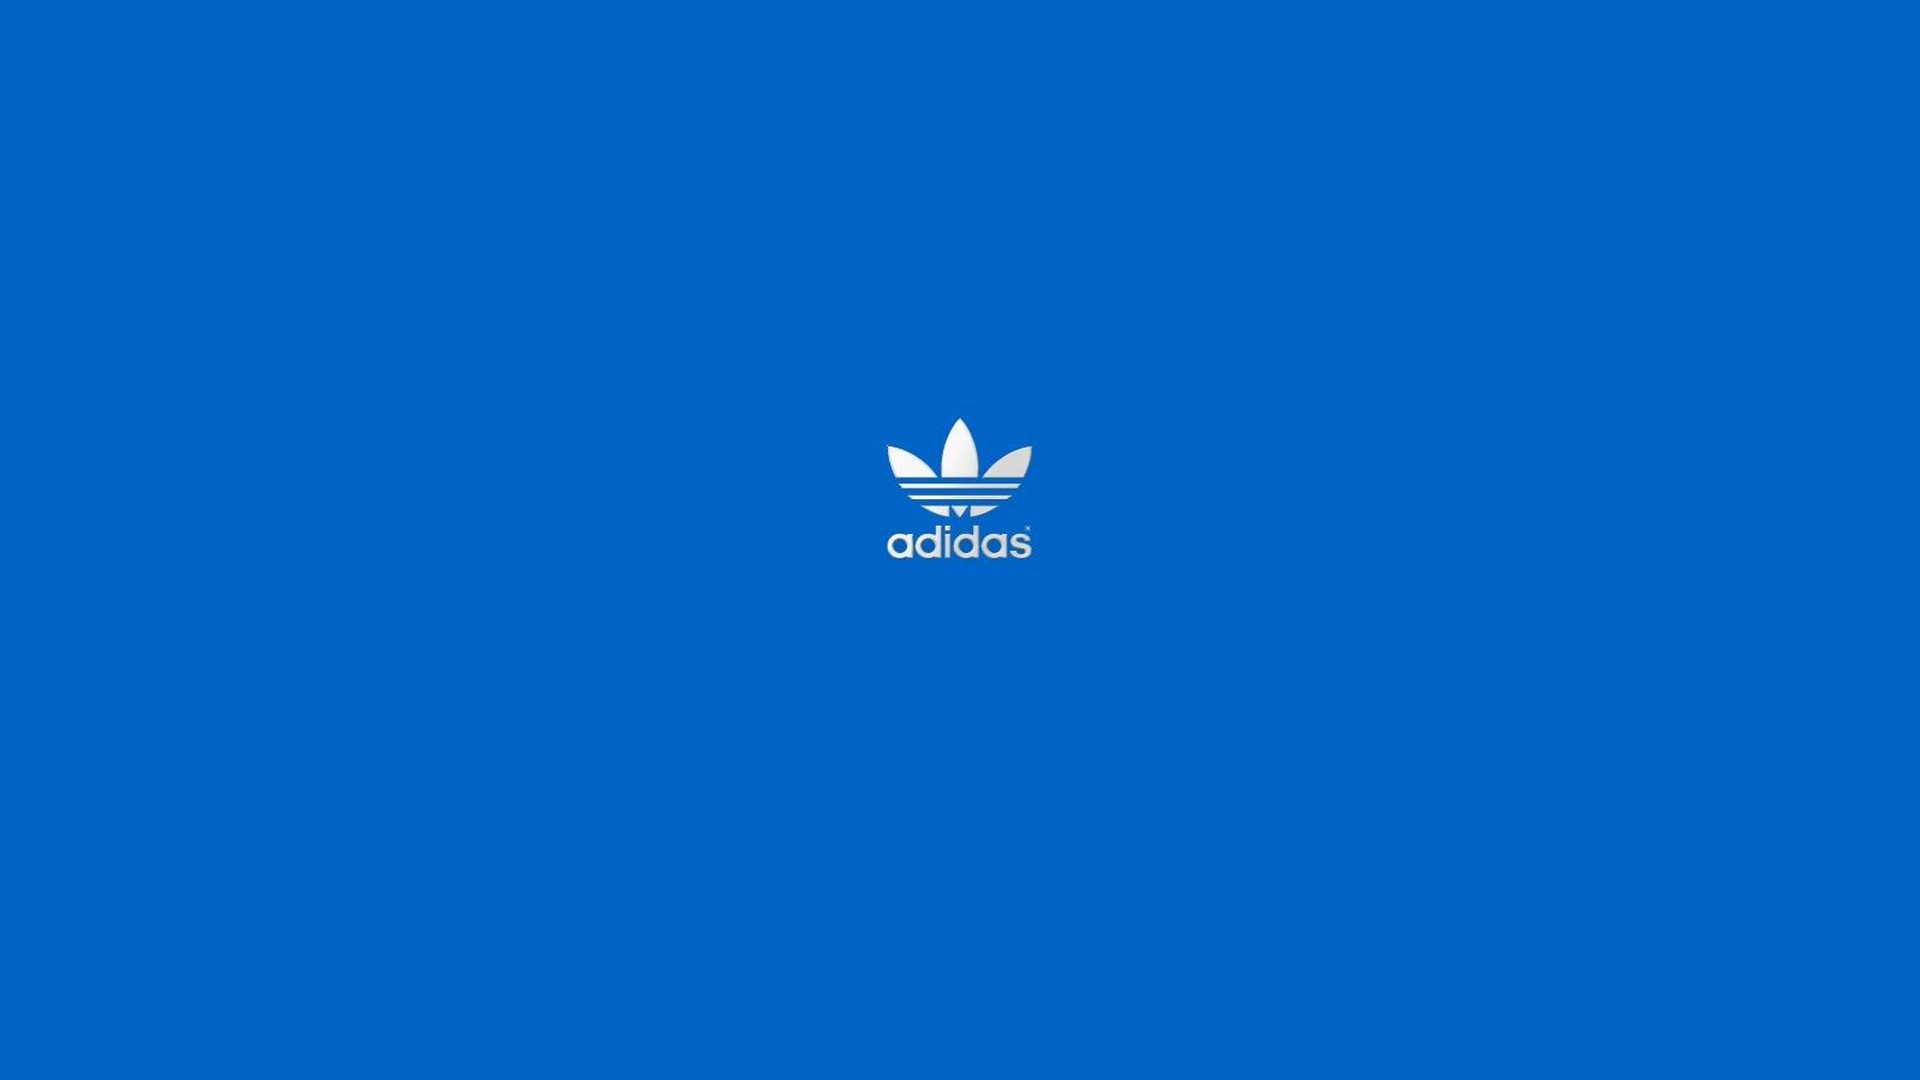 Adidas Logo Desktop Wallpaper with high-resolution 1920x1080 pixel. You can use this wallpaper for your Windows and Mac OS computers as well as your Android and iPhone smartphones